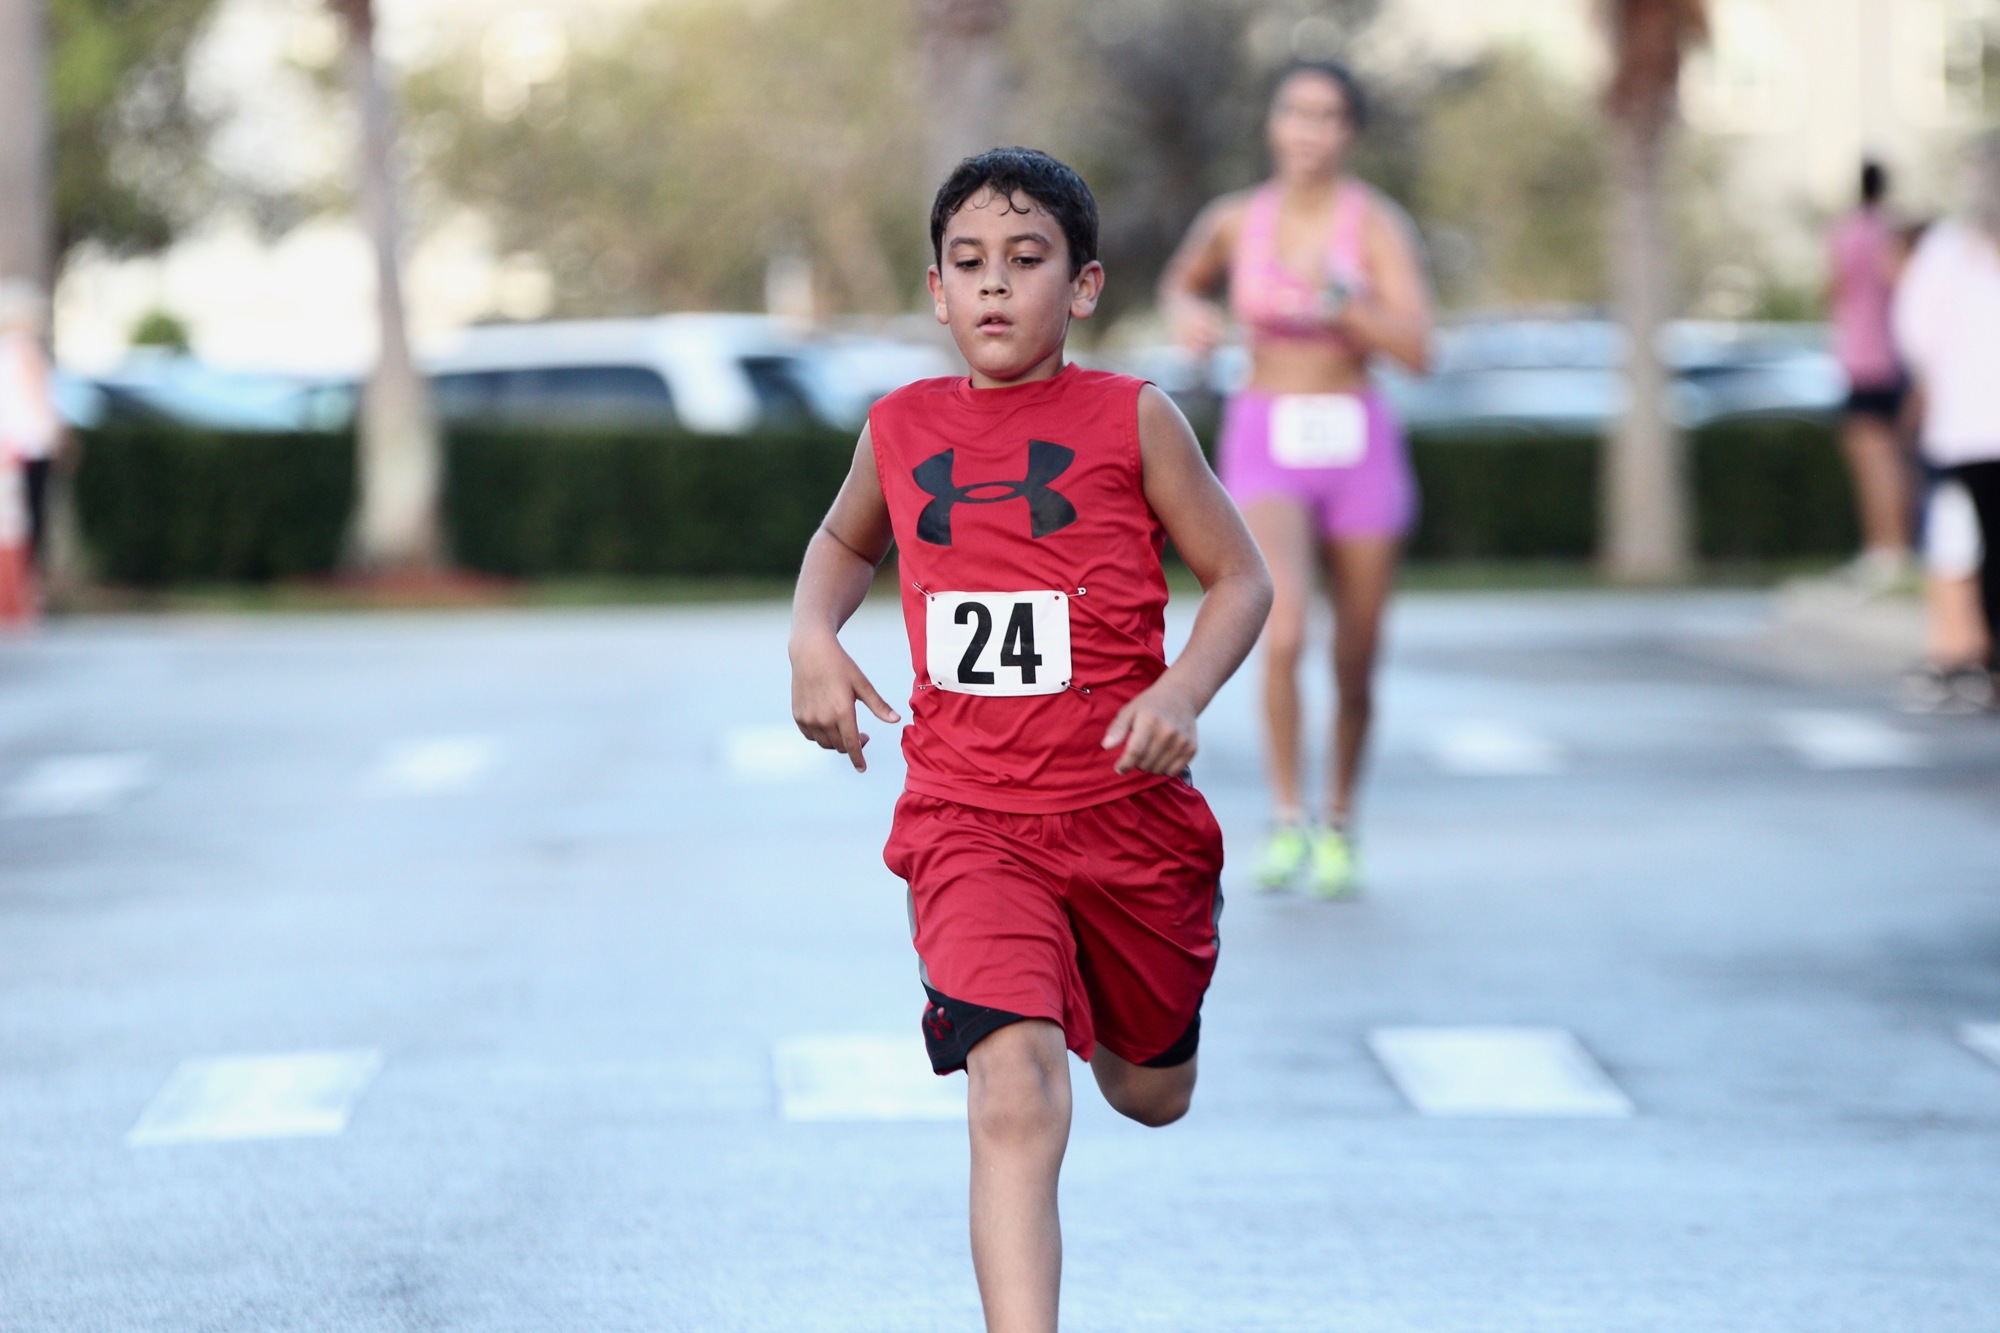 Ten-year-old C. Baeza dashes toward the finish line at FHF's Pink 5K run. Photo by Ray Boone